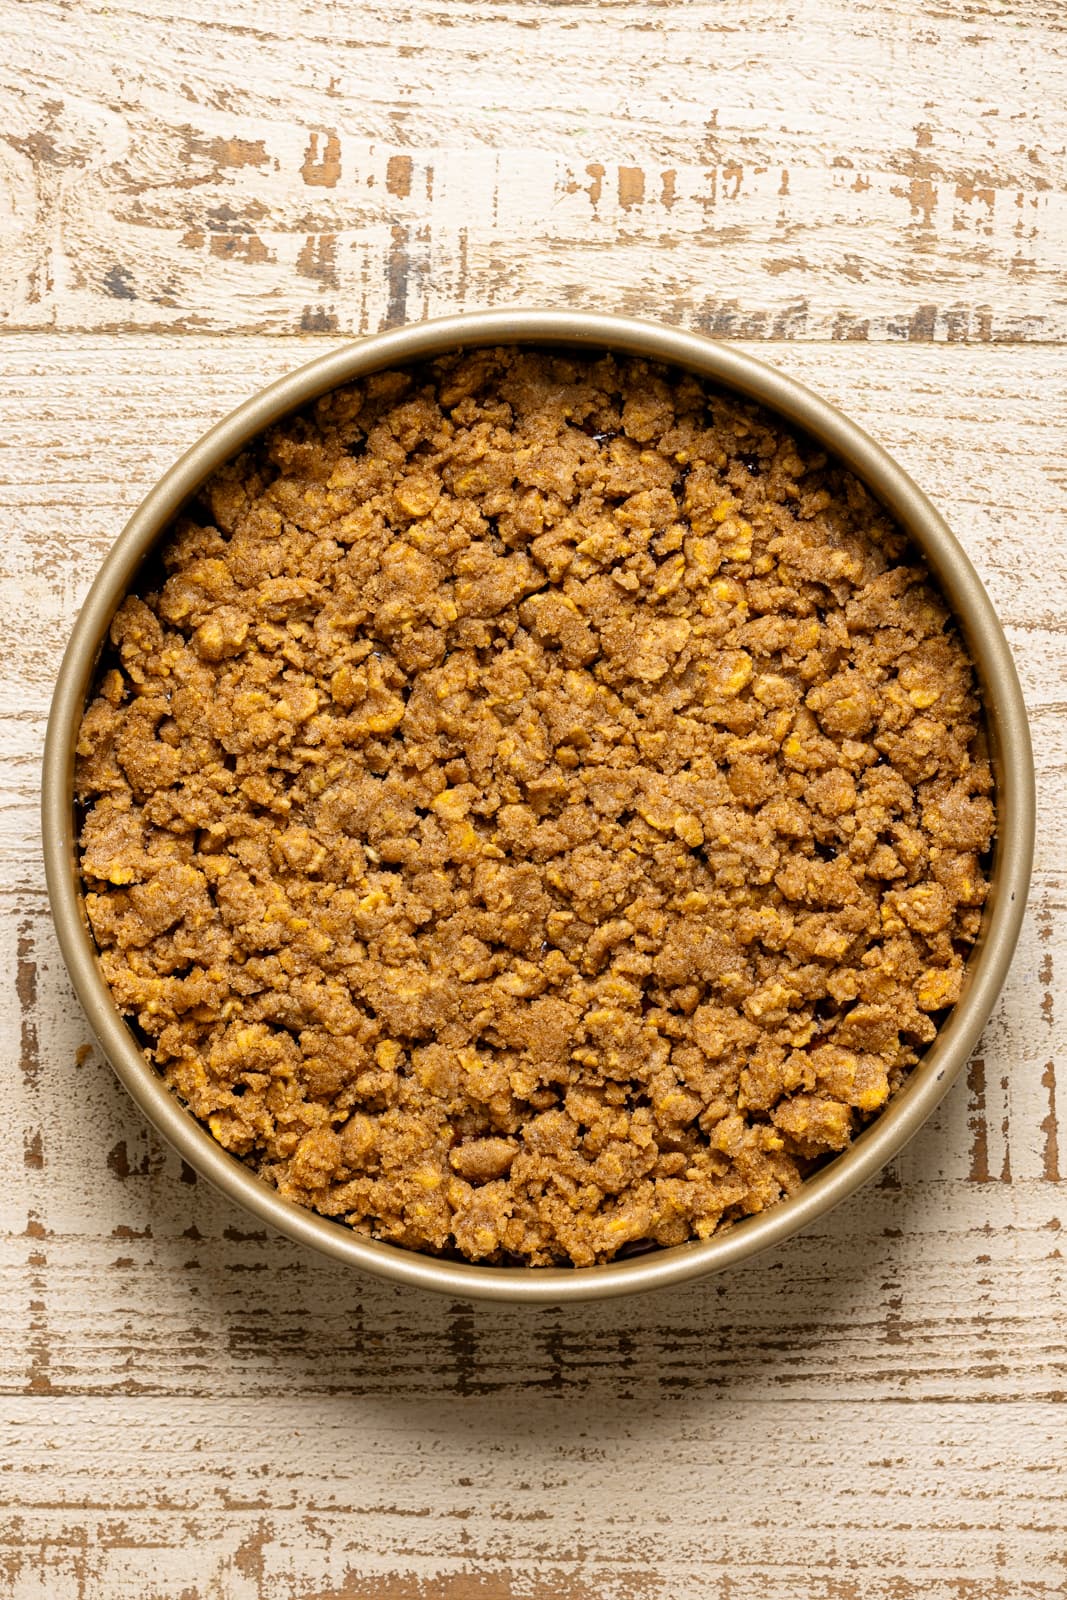 Strawberry Crumb Cake batter and crumble topping in a cake pan.